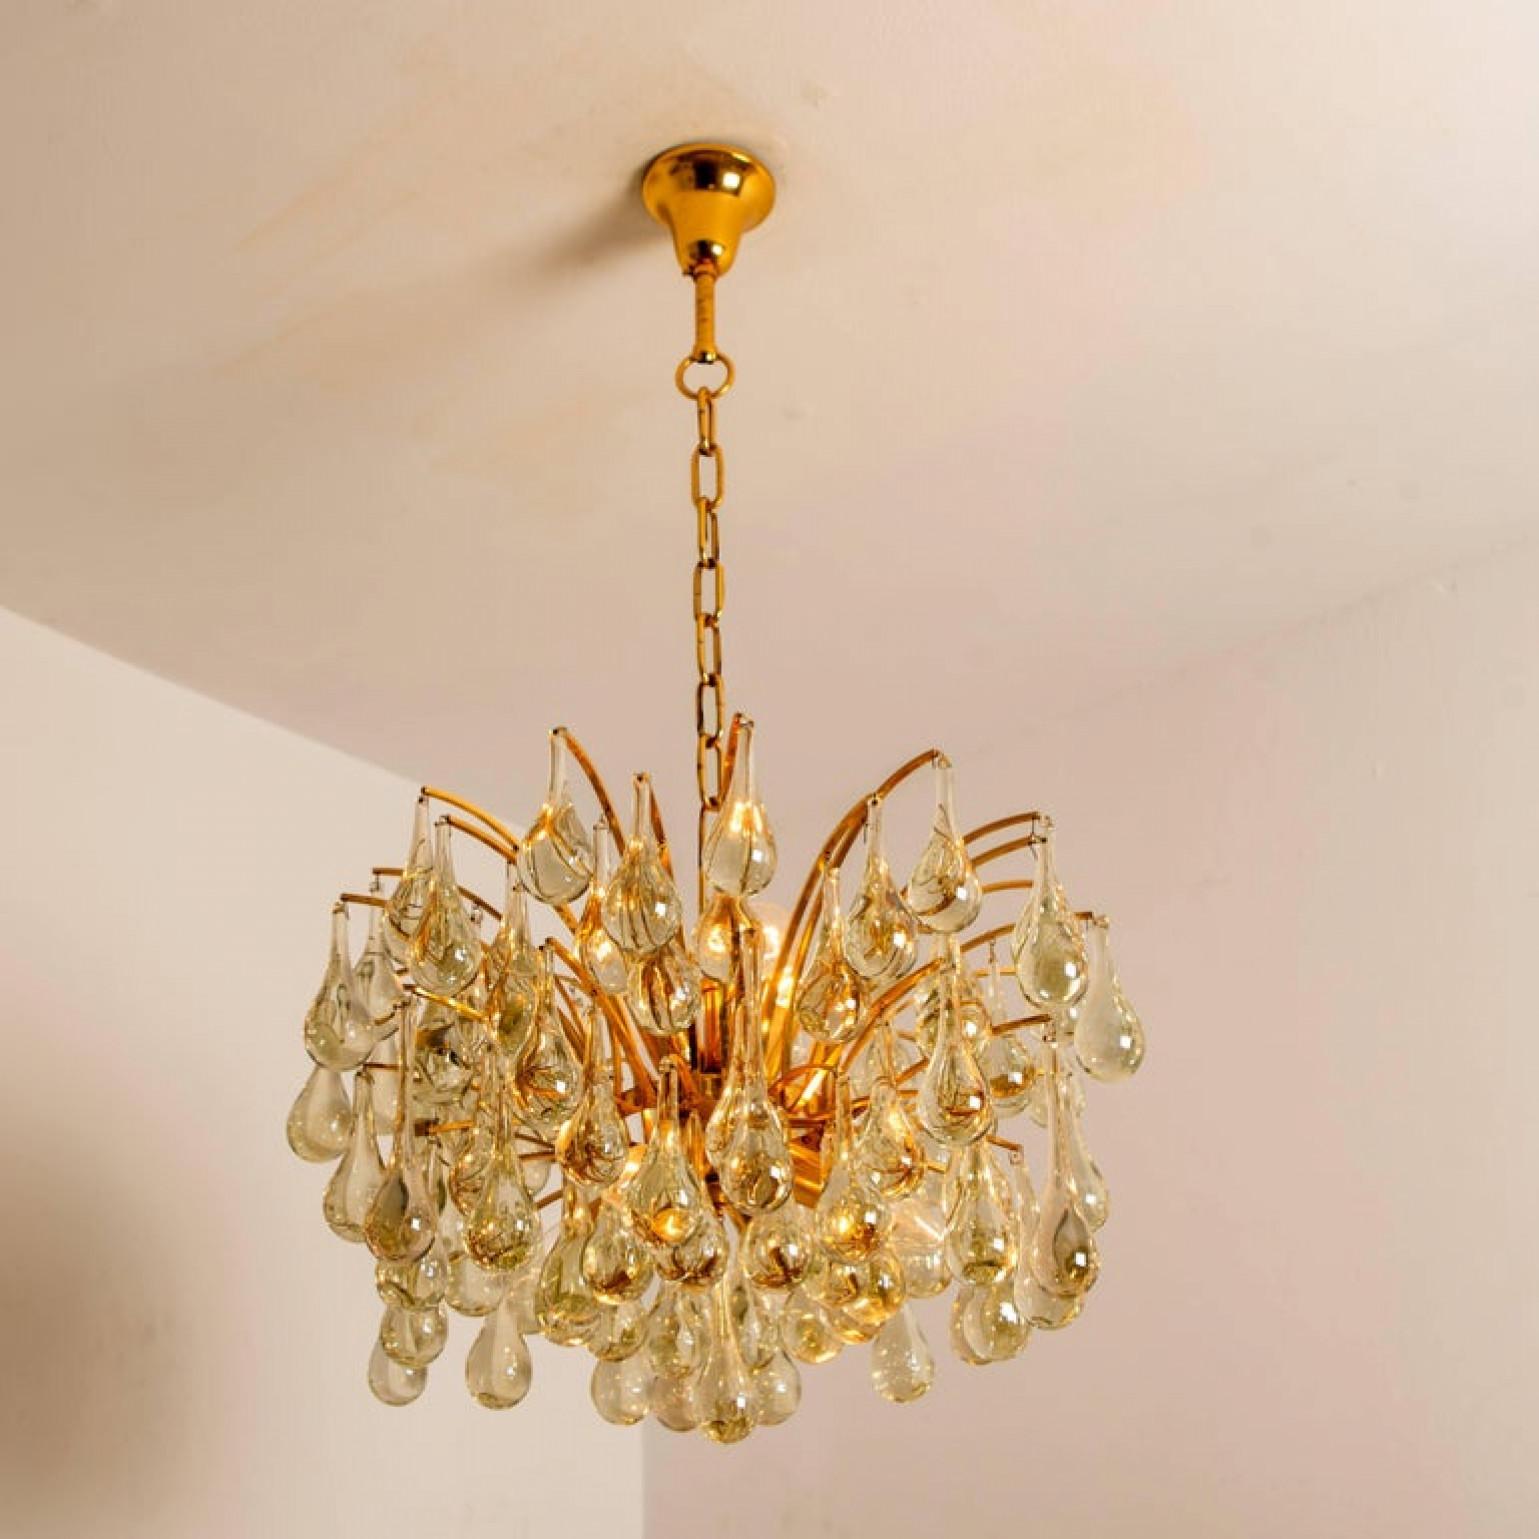 1 of the 2 Large Brass and Crystal Chandeliers, Ernst Palme, Germany, 1970s For Sale 6